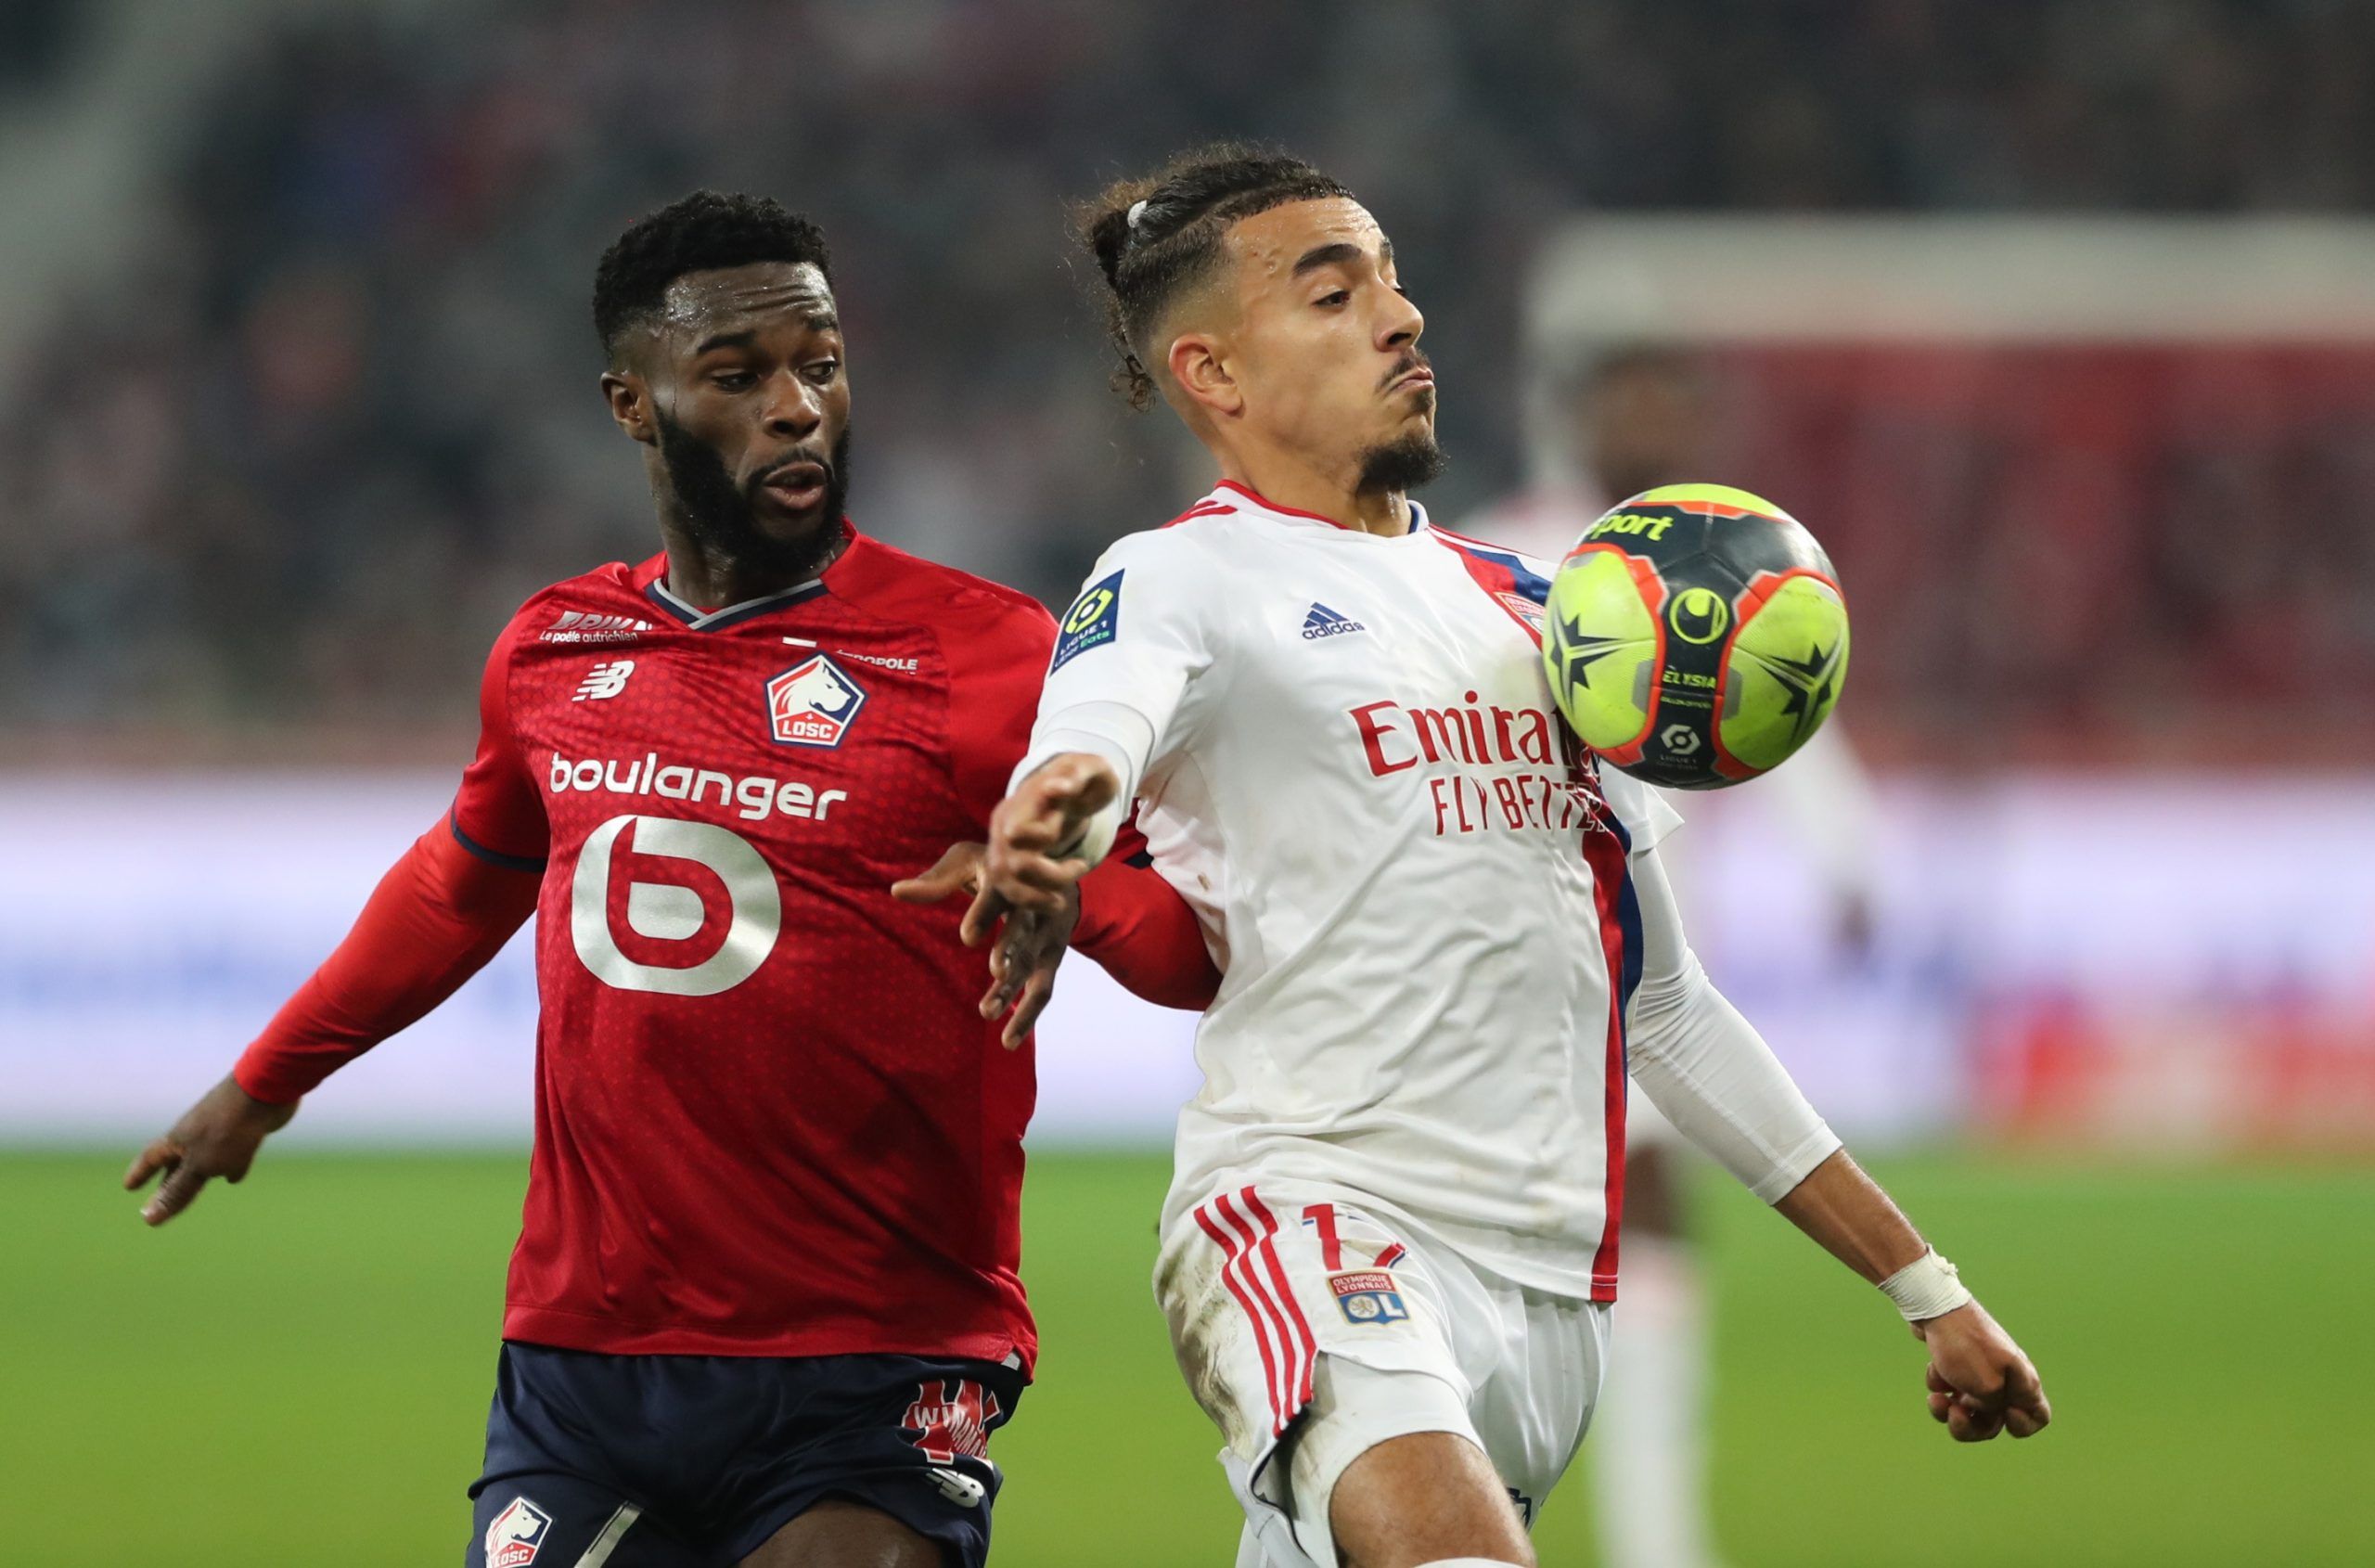 Soccer Football - Ligue 1 - Lille v Olympique Lyonnais - Stade Pierre-Mauroy, Villeneuve-d'Ascq, France - December 12, 2021 Olympique Lyonnais' Malo Gusto in action with Lille's Jonathan Bamba REUTERS/Pascal Rossignol